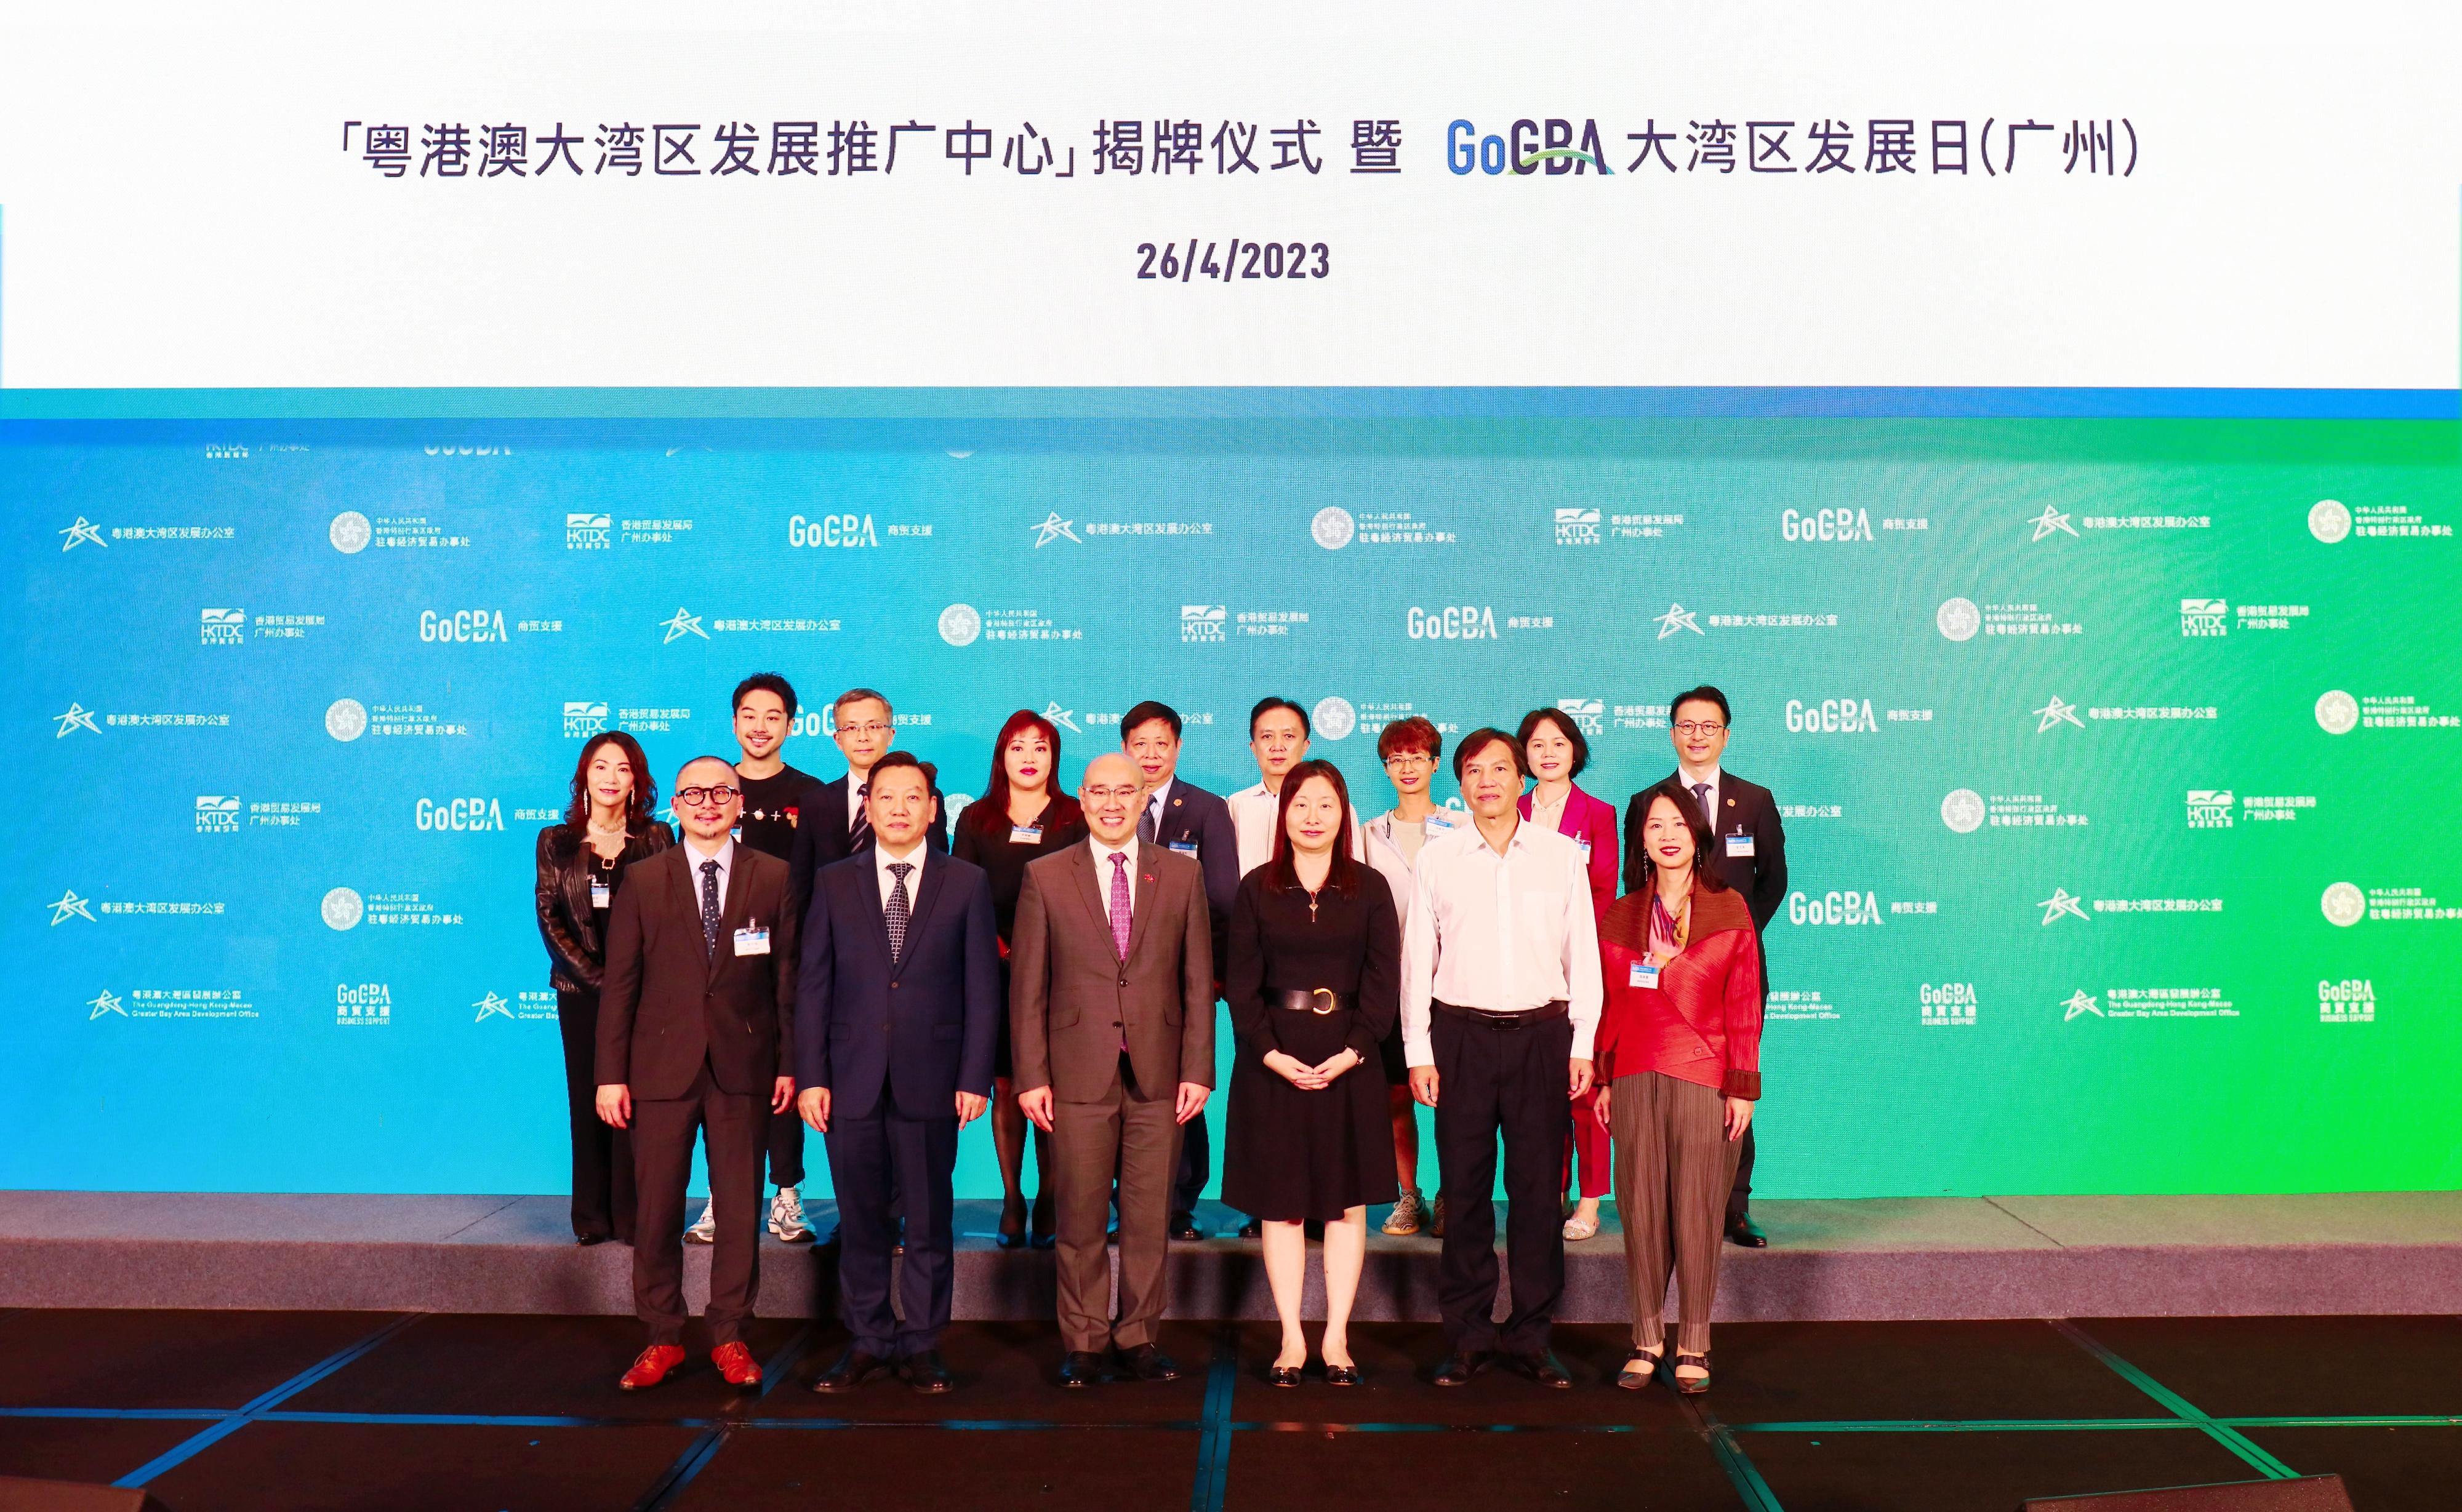 The GoGBA Development Day (Guangzhou) seminar starts right after the plague unveiling ceremony of the Guangdong-Hong Kong-Macao Greater Bay Area Development Promotion Centre held in Guangzhou today (April 26). Photo shows the Acting Commissioner for the Development of the Guangdong-Hong Kong-Macao Greater Bay Area, Mr Benjamin Mok (front row, third left); the Director of Hong Kong Economic and Trade Office in Guangdong, Miss Linda So (front row, third right); and other guests.